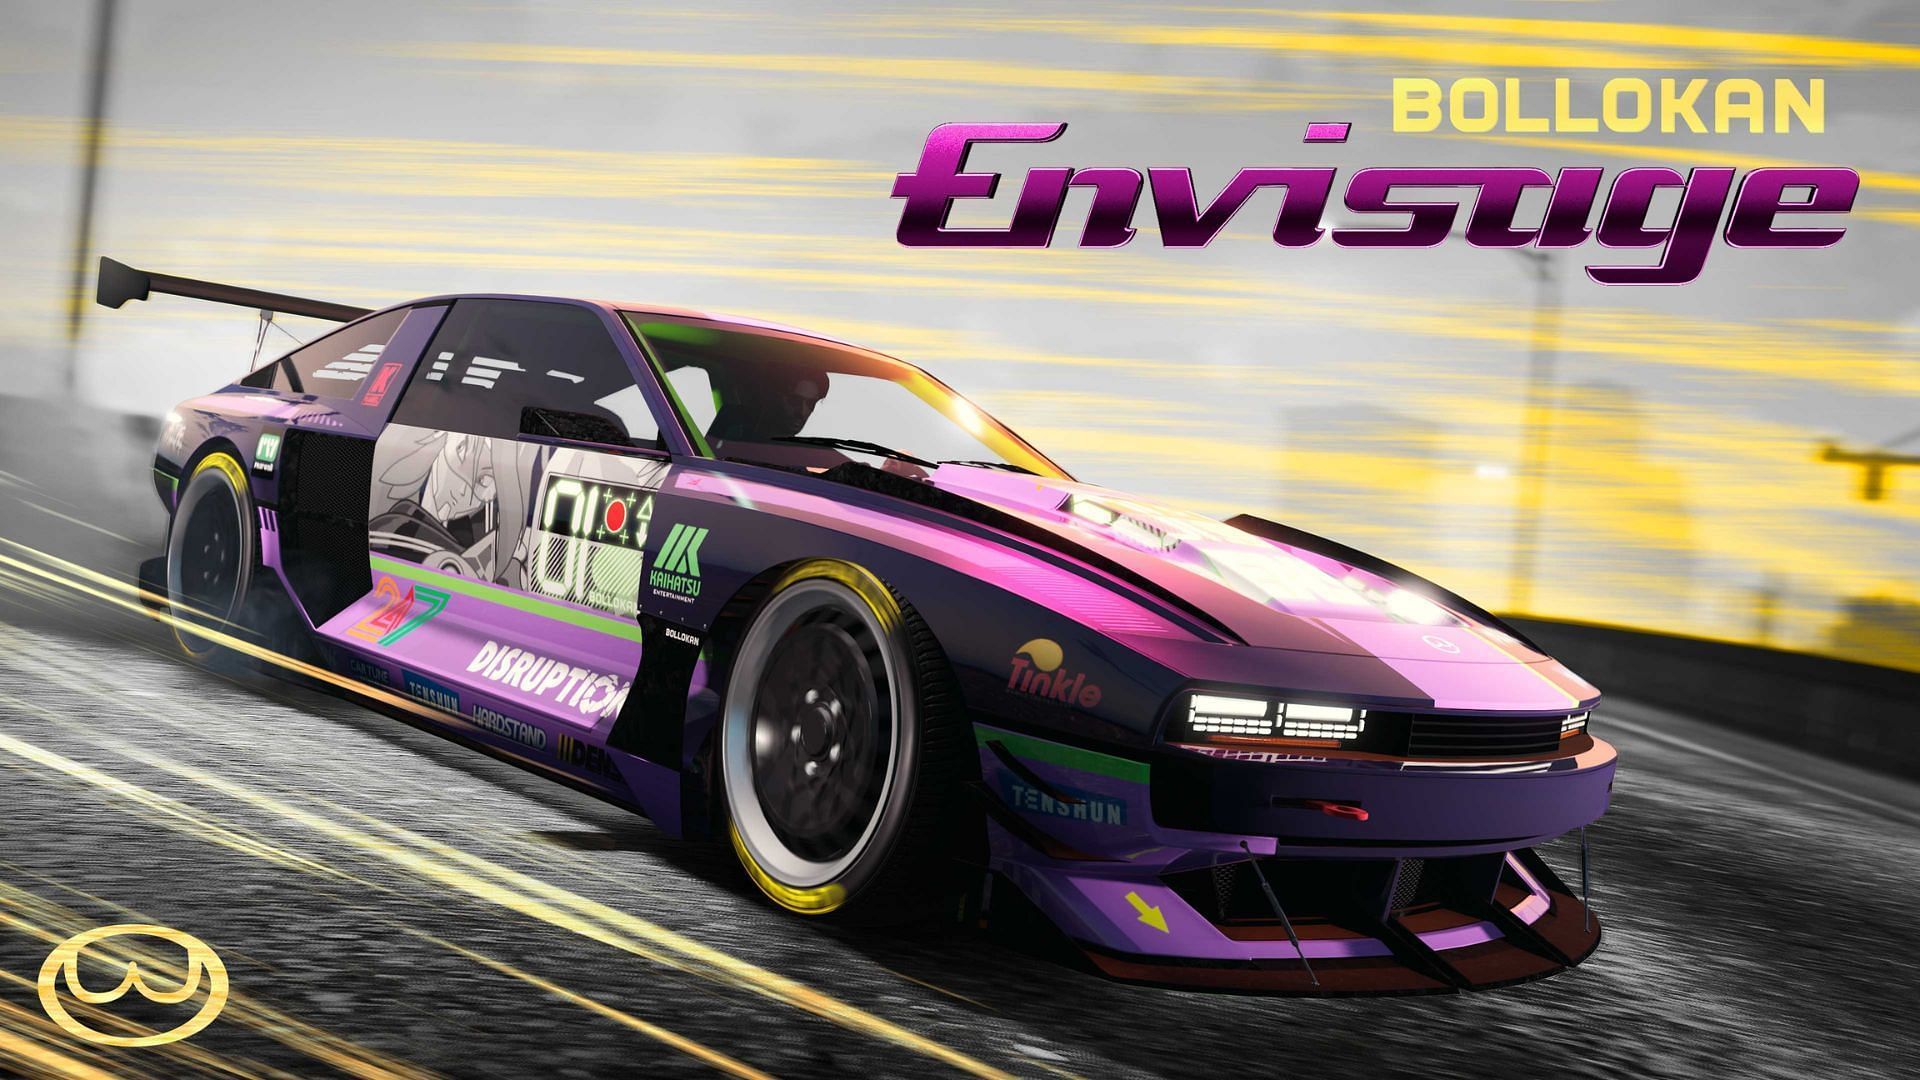 The Bollokan Envisage is one of the latest vehicles (Image via Rockstar Games)